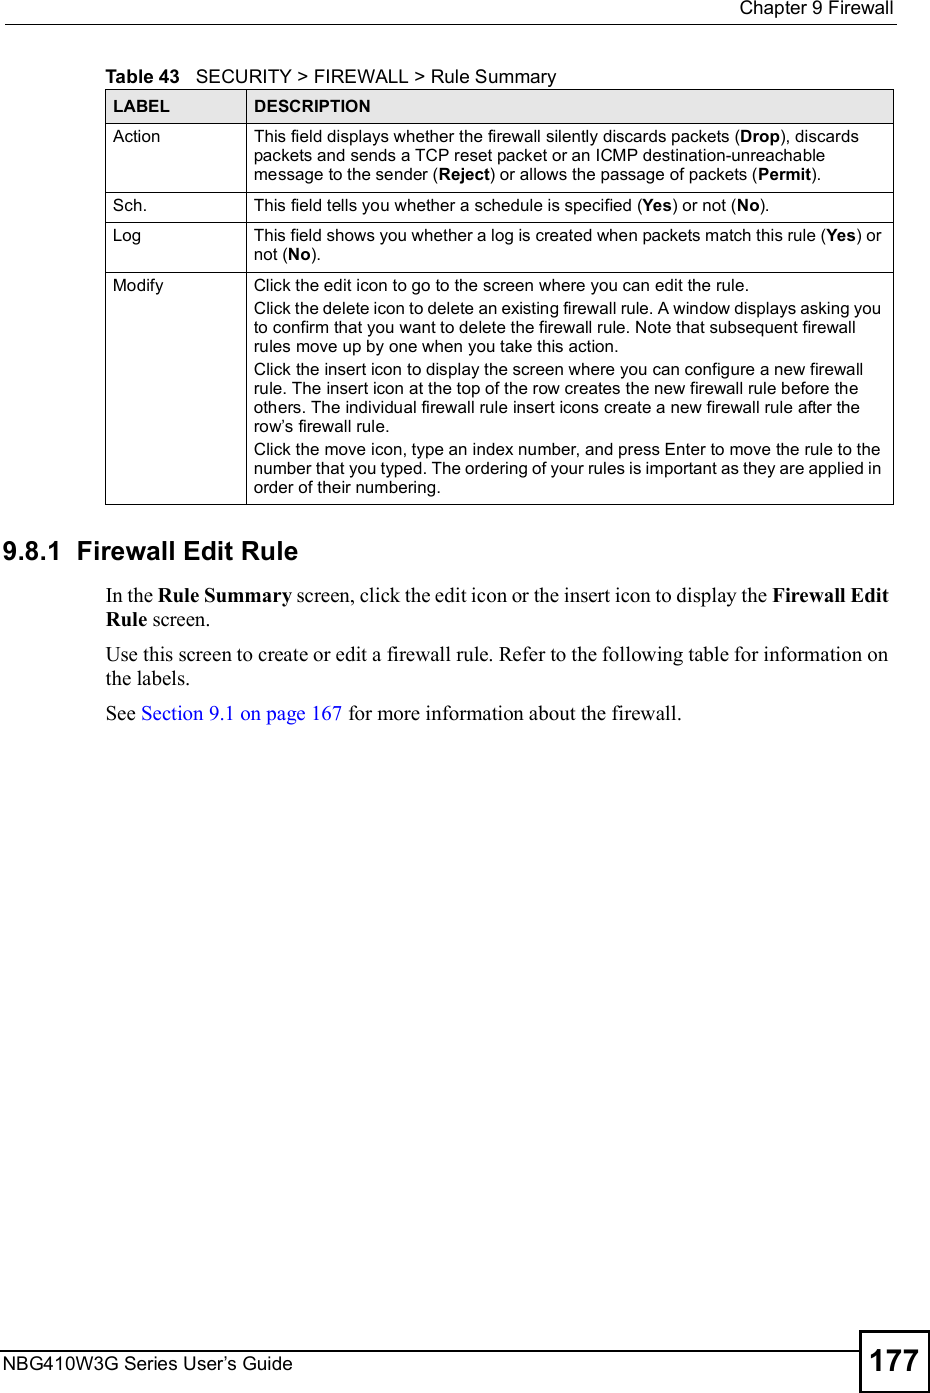  Chapter 9FirewallNBG410W3G Series User s Guide 1779.8.1  Firewall Edit Rule    In the Rule Summary screen, click the edit icon or the insert icon to display the Firewall Edit Rule screen. Use this screen to create or edit a firewall rule. Refer to the following table for information on the labels.See Section 9.1 on page 167 for more information about the firewall.ActionThis field displays whether the firewall silently discards packets (Drop), discards packets and sends a TCP reset packet or an ICMP destination-unreachable message to the sender (Reject) or allows the passage of packets (Permit).Sch.This field tells you whether a schedule is specified (Yes) or not (No).LogThis field shows you whether a log is created when packets match this rule (Yes) or not (No).ModifyClick the edit icon to go to the screen where you can edit the rule.Click the delete icon to delete an existing firewall rule. A window displays asking you to confirm that you want to delete the firewall rule. Note that subsequent firewall rules move up by one when you take this action.Click the insert icon to display the screen where you can configure a new firewall rule. The insert icon at the top of the row creates the new firewall rule before the others. The individual firewall rule insert icons create a new firewall rule after the row s firewall rule.Click the move icon, type an index number, and press Enter to move the rule to the number that you typed. The ordering of your rules is important as they are applied in order of their numbering.Table 43   SECURITY &gt; FIREWALL &gt; Rule SummaryLABEL DESCRIPTION